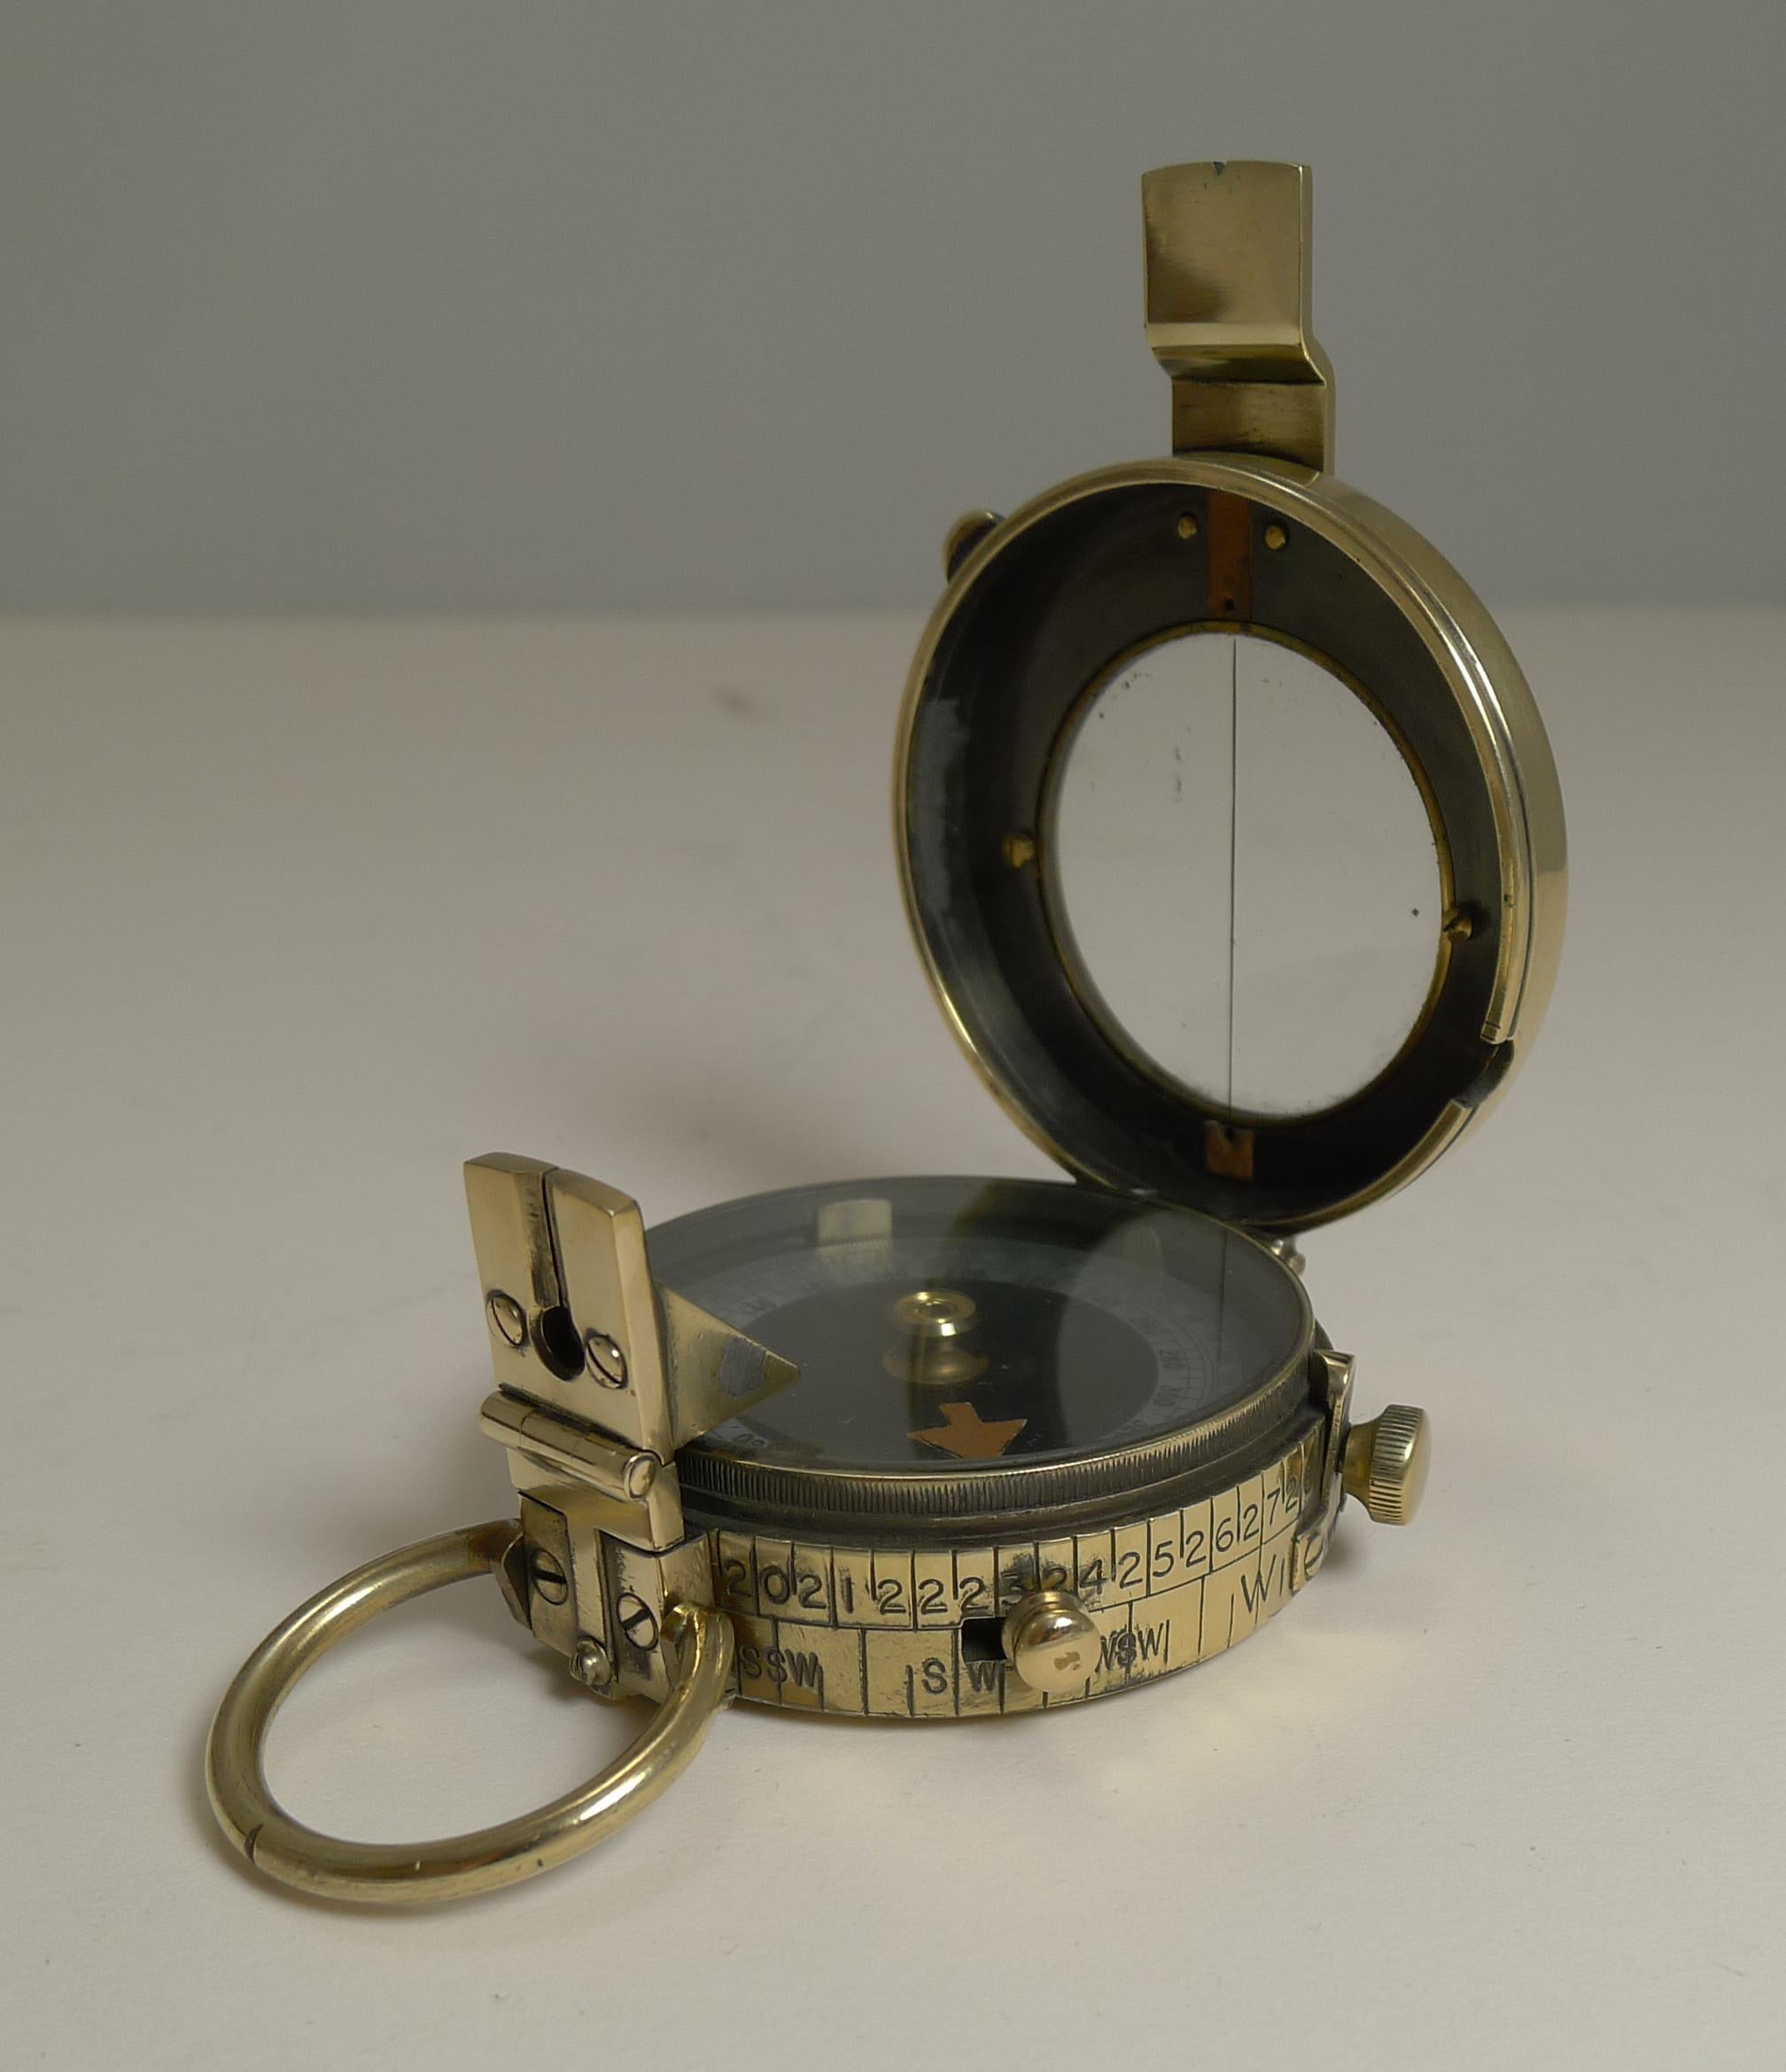 Early 20th Century WWI 1918 British Army Officer's Compass by J H Steward, London